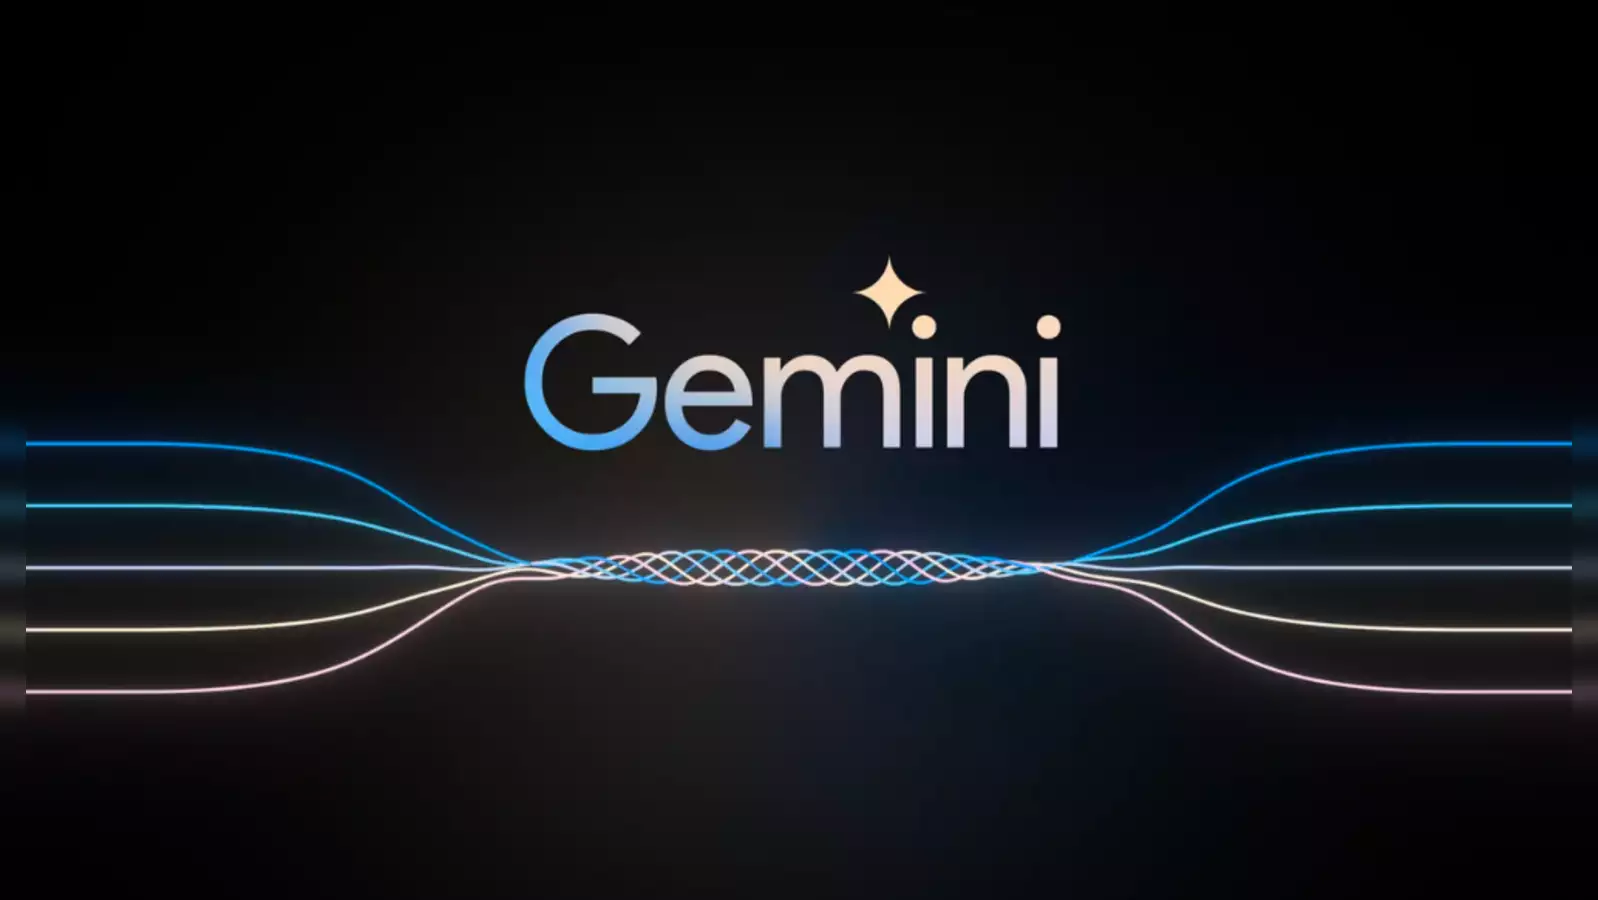 Google Restricts Election-Related Queries on Gemini AI Chatbot